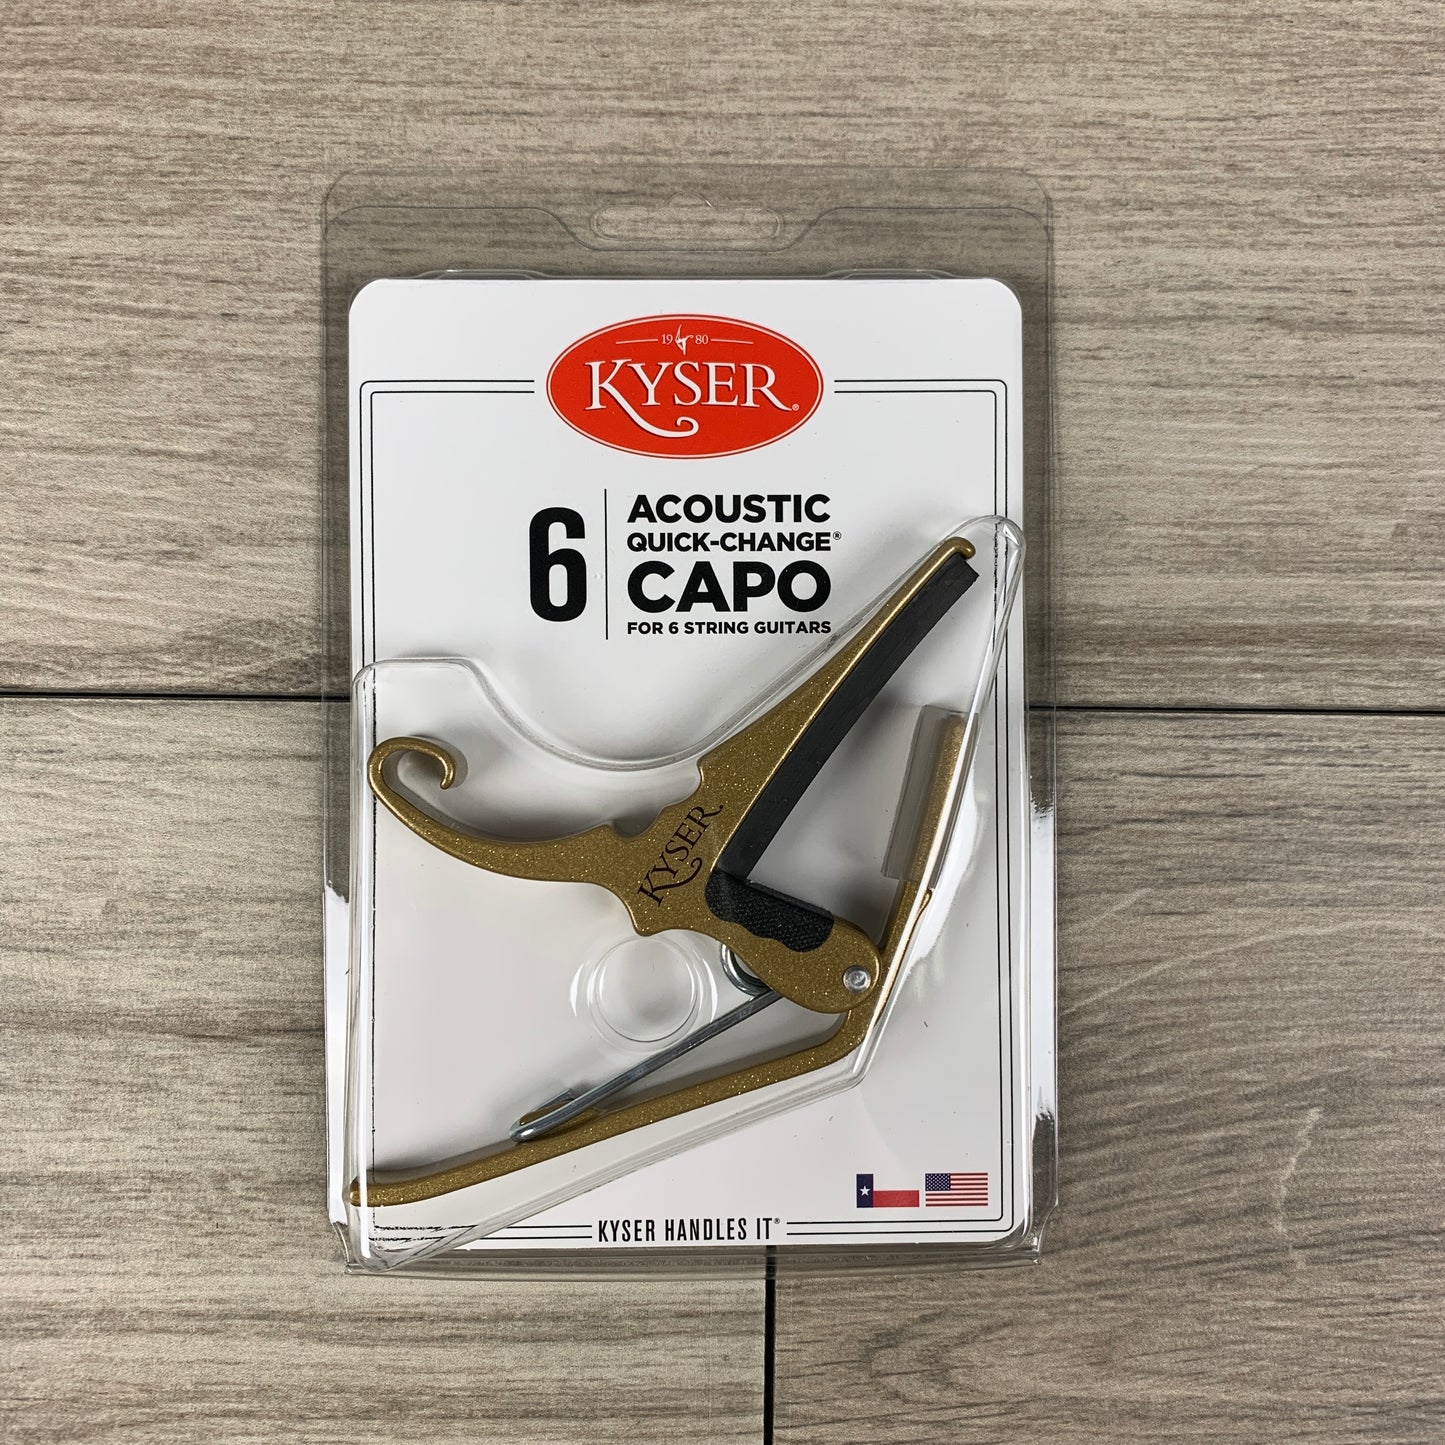 Kyser Acoustic Quick-Change Capo for 6-String Guitars, Gold